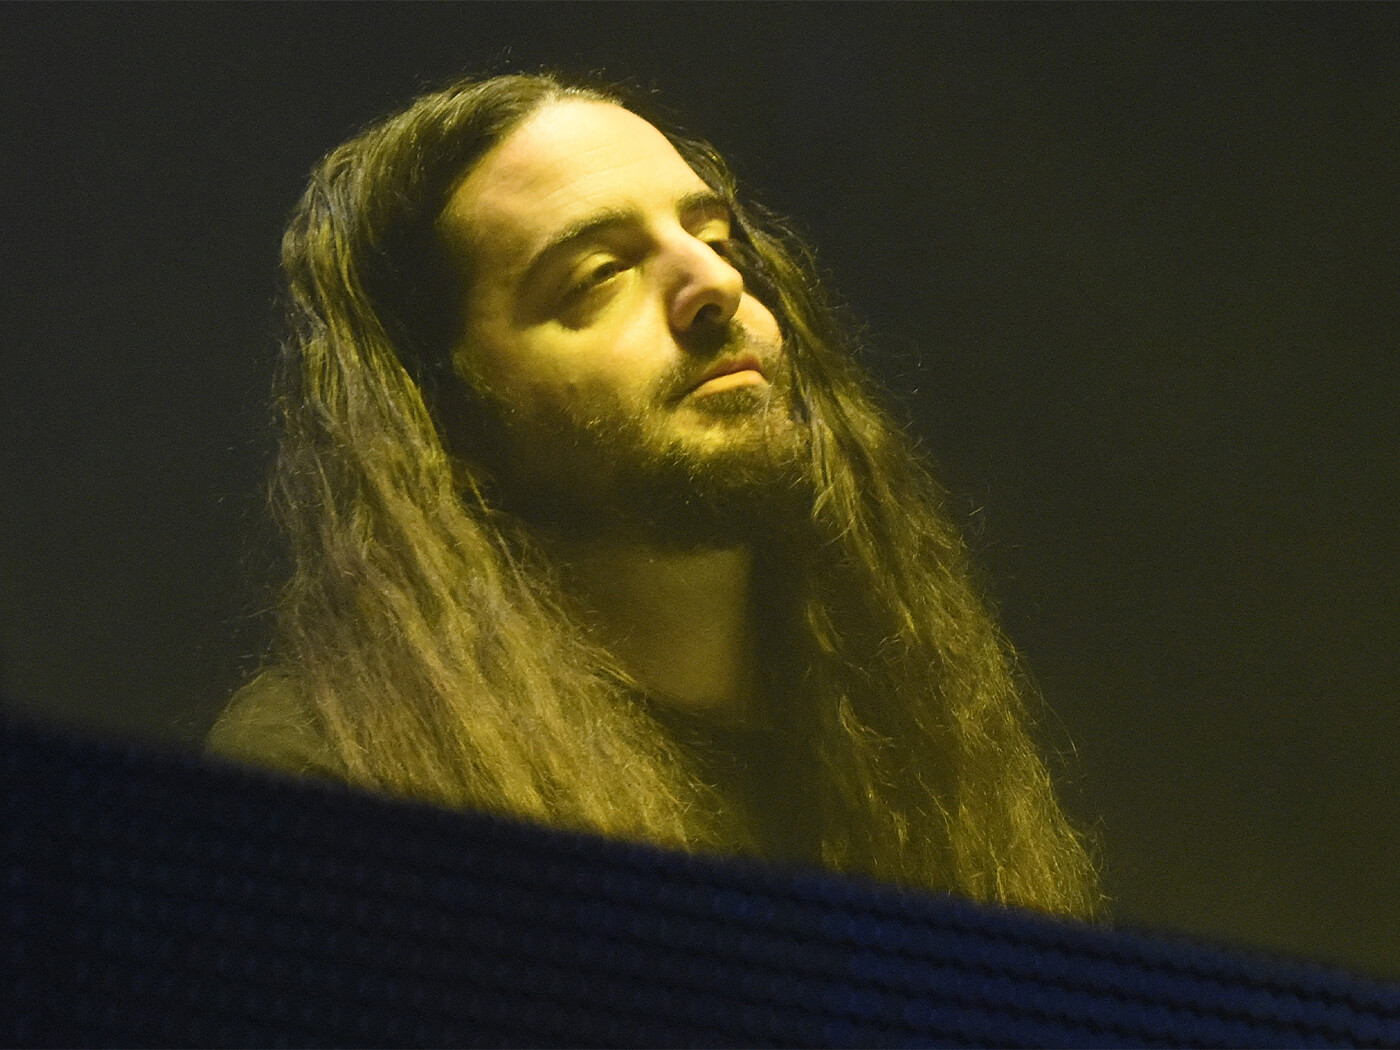 Bassnectar onstage